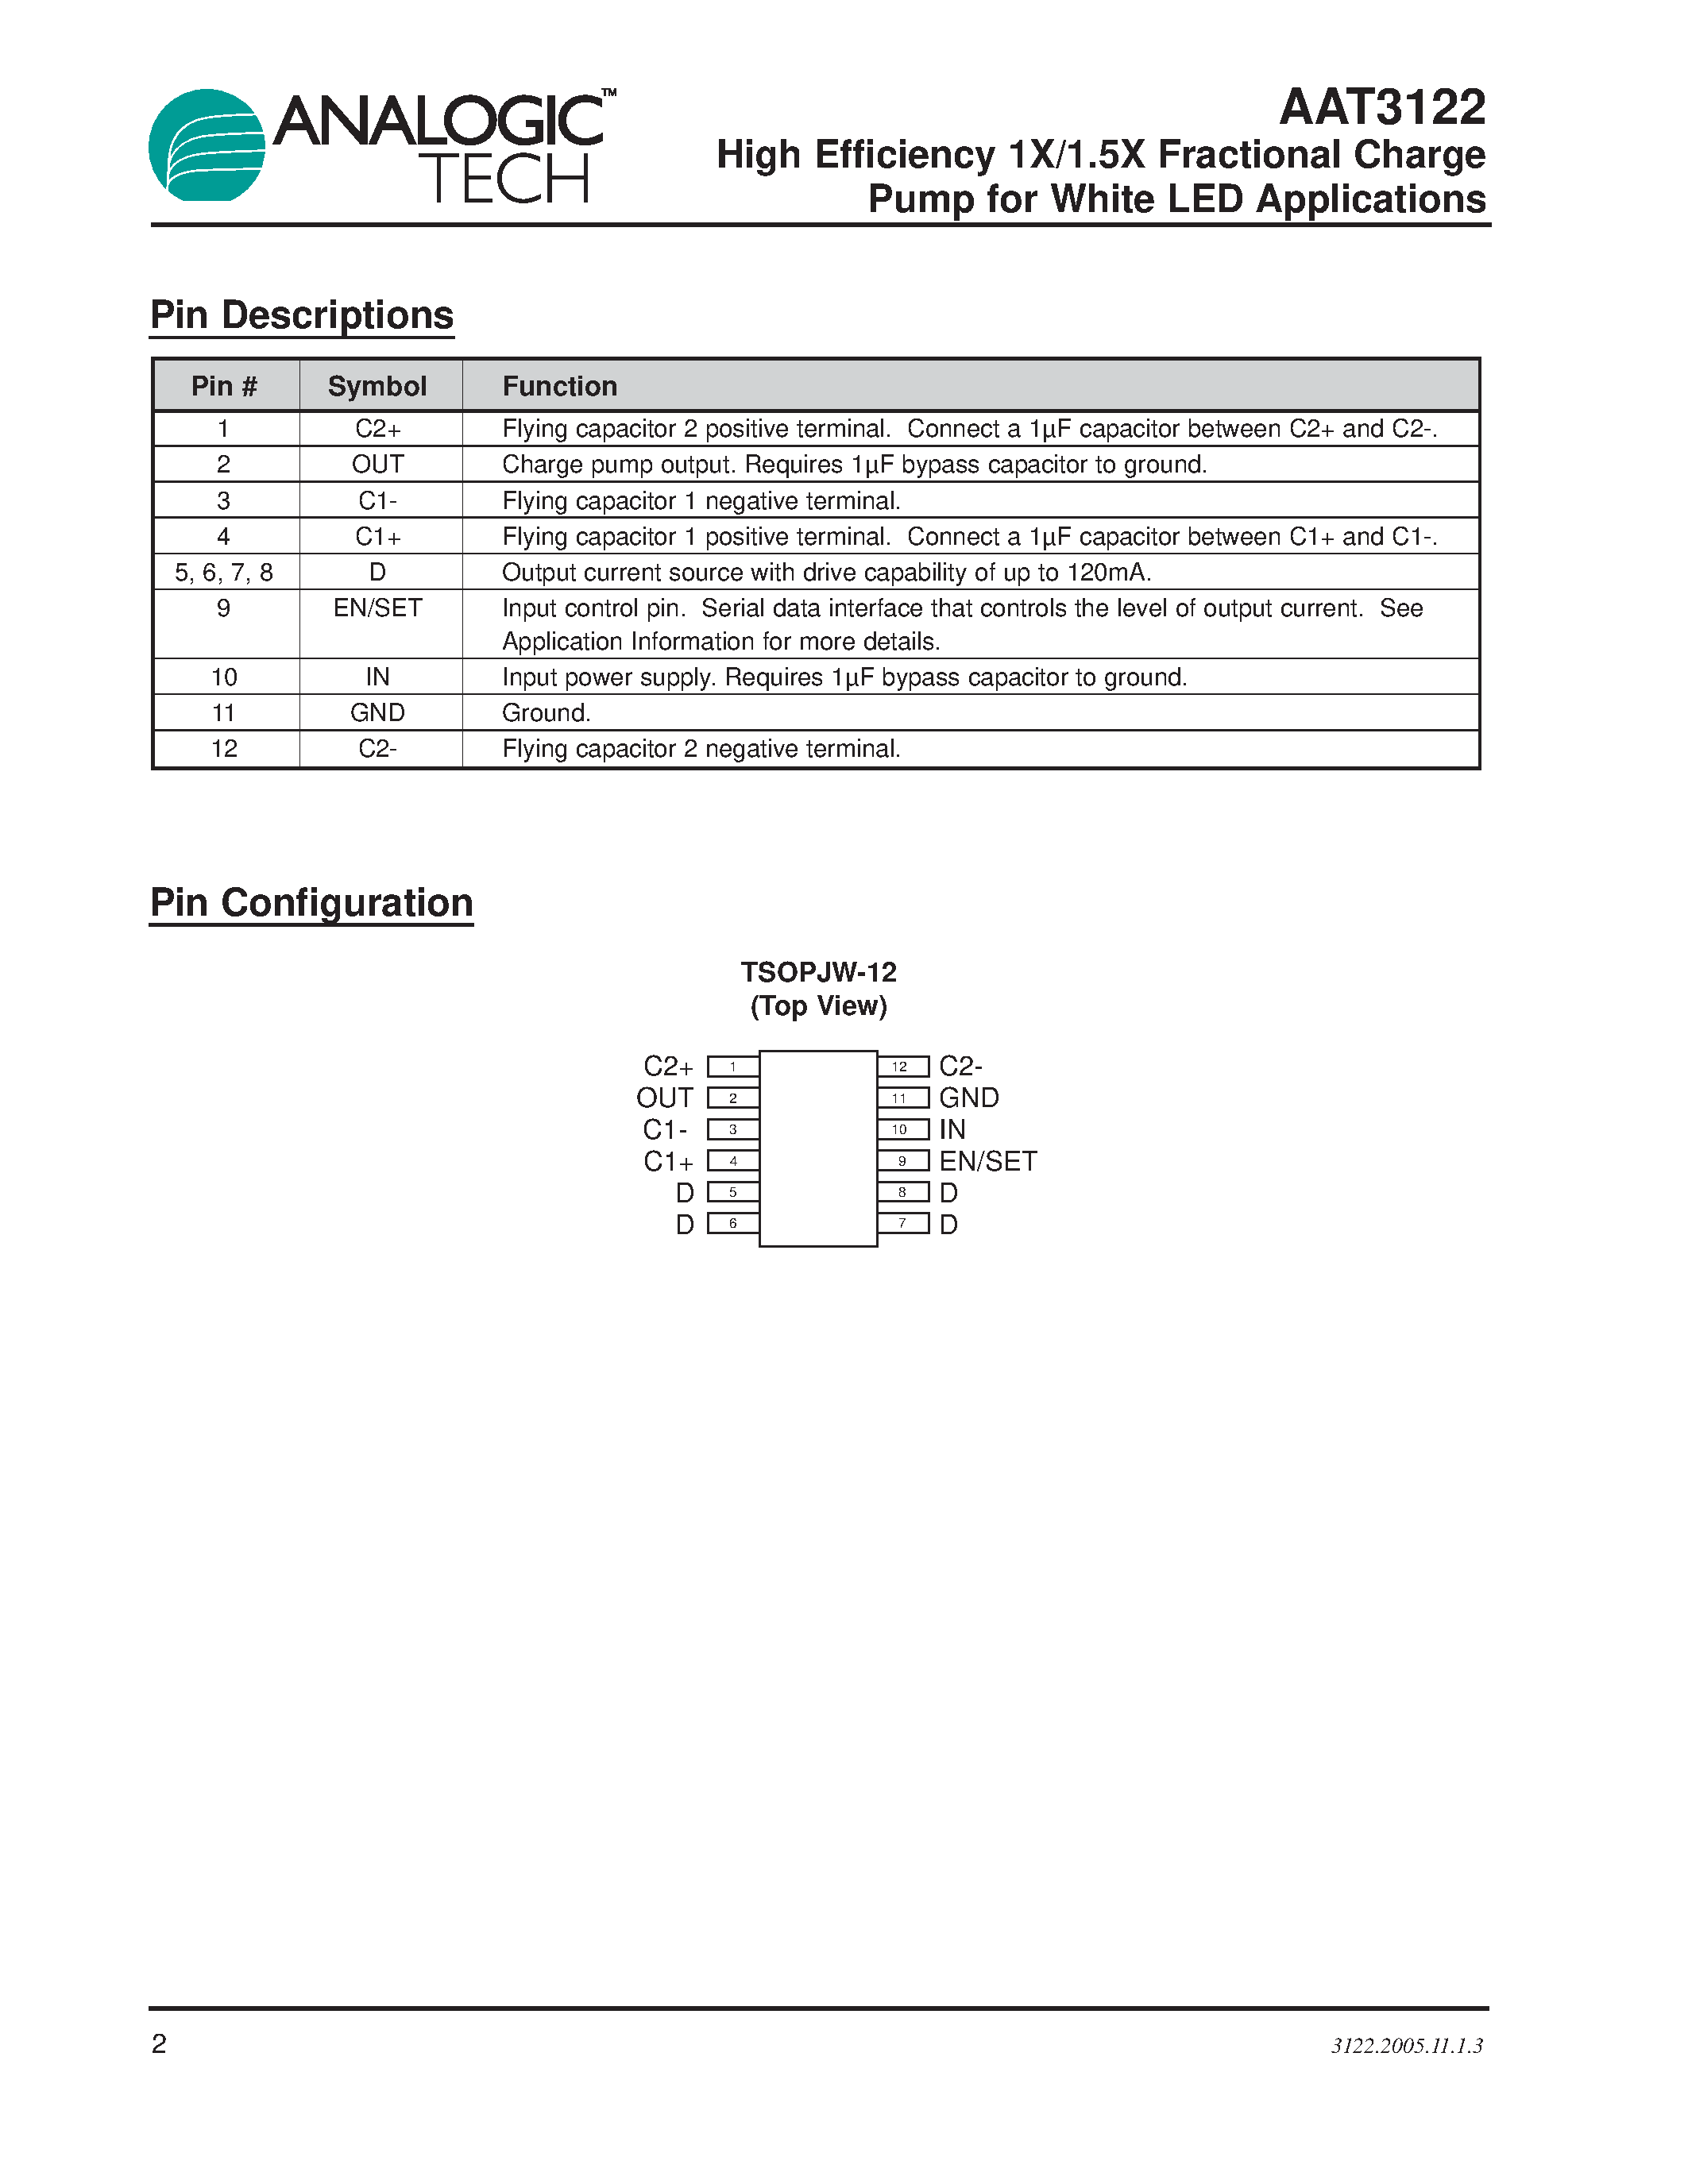 Datasheet AAT3122 - High Efficiency 1X/1.5X Fractional Charge Pump page 2